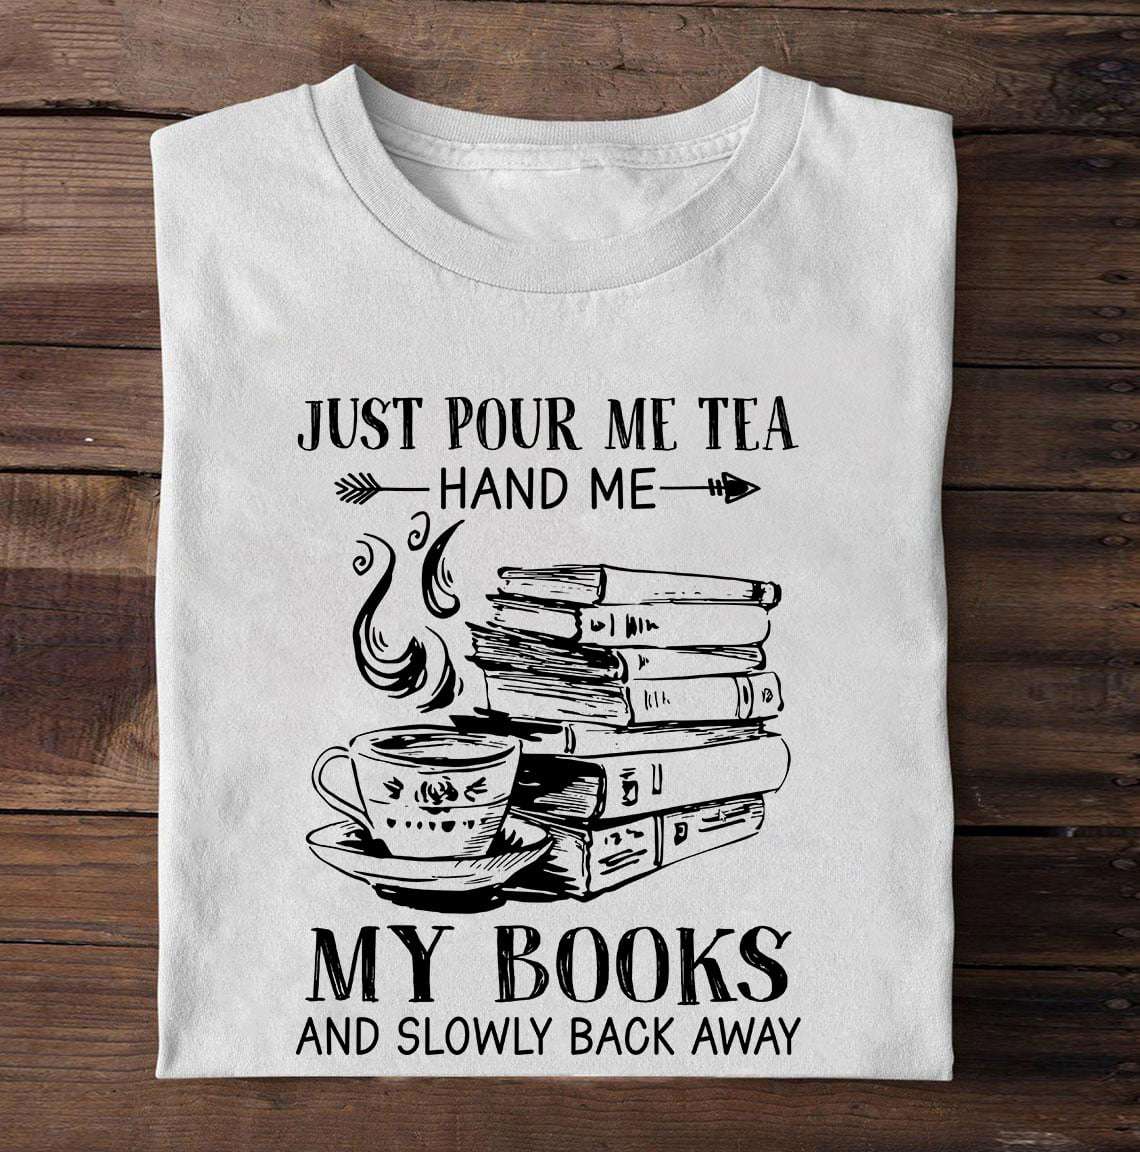 Just pour me tea hand me my books and slowly back away - Tea and books, T-shirt for bookaholic